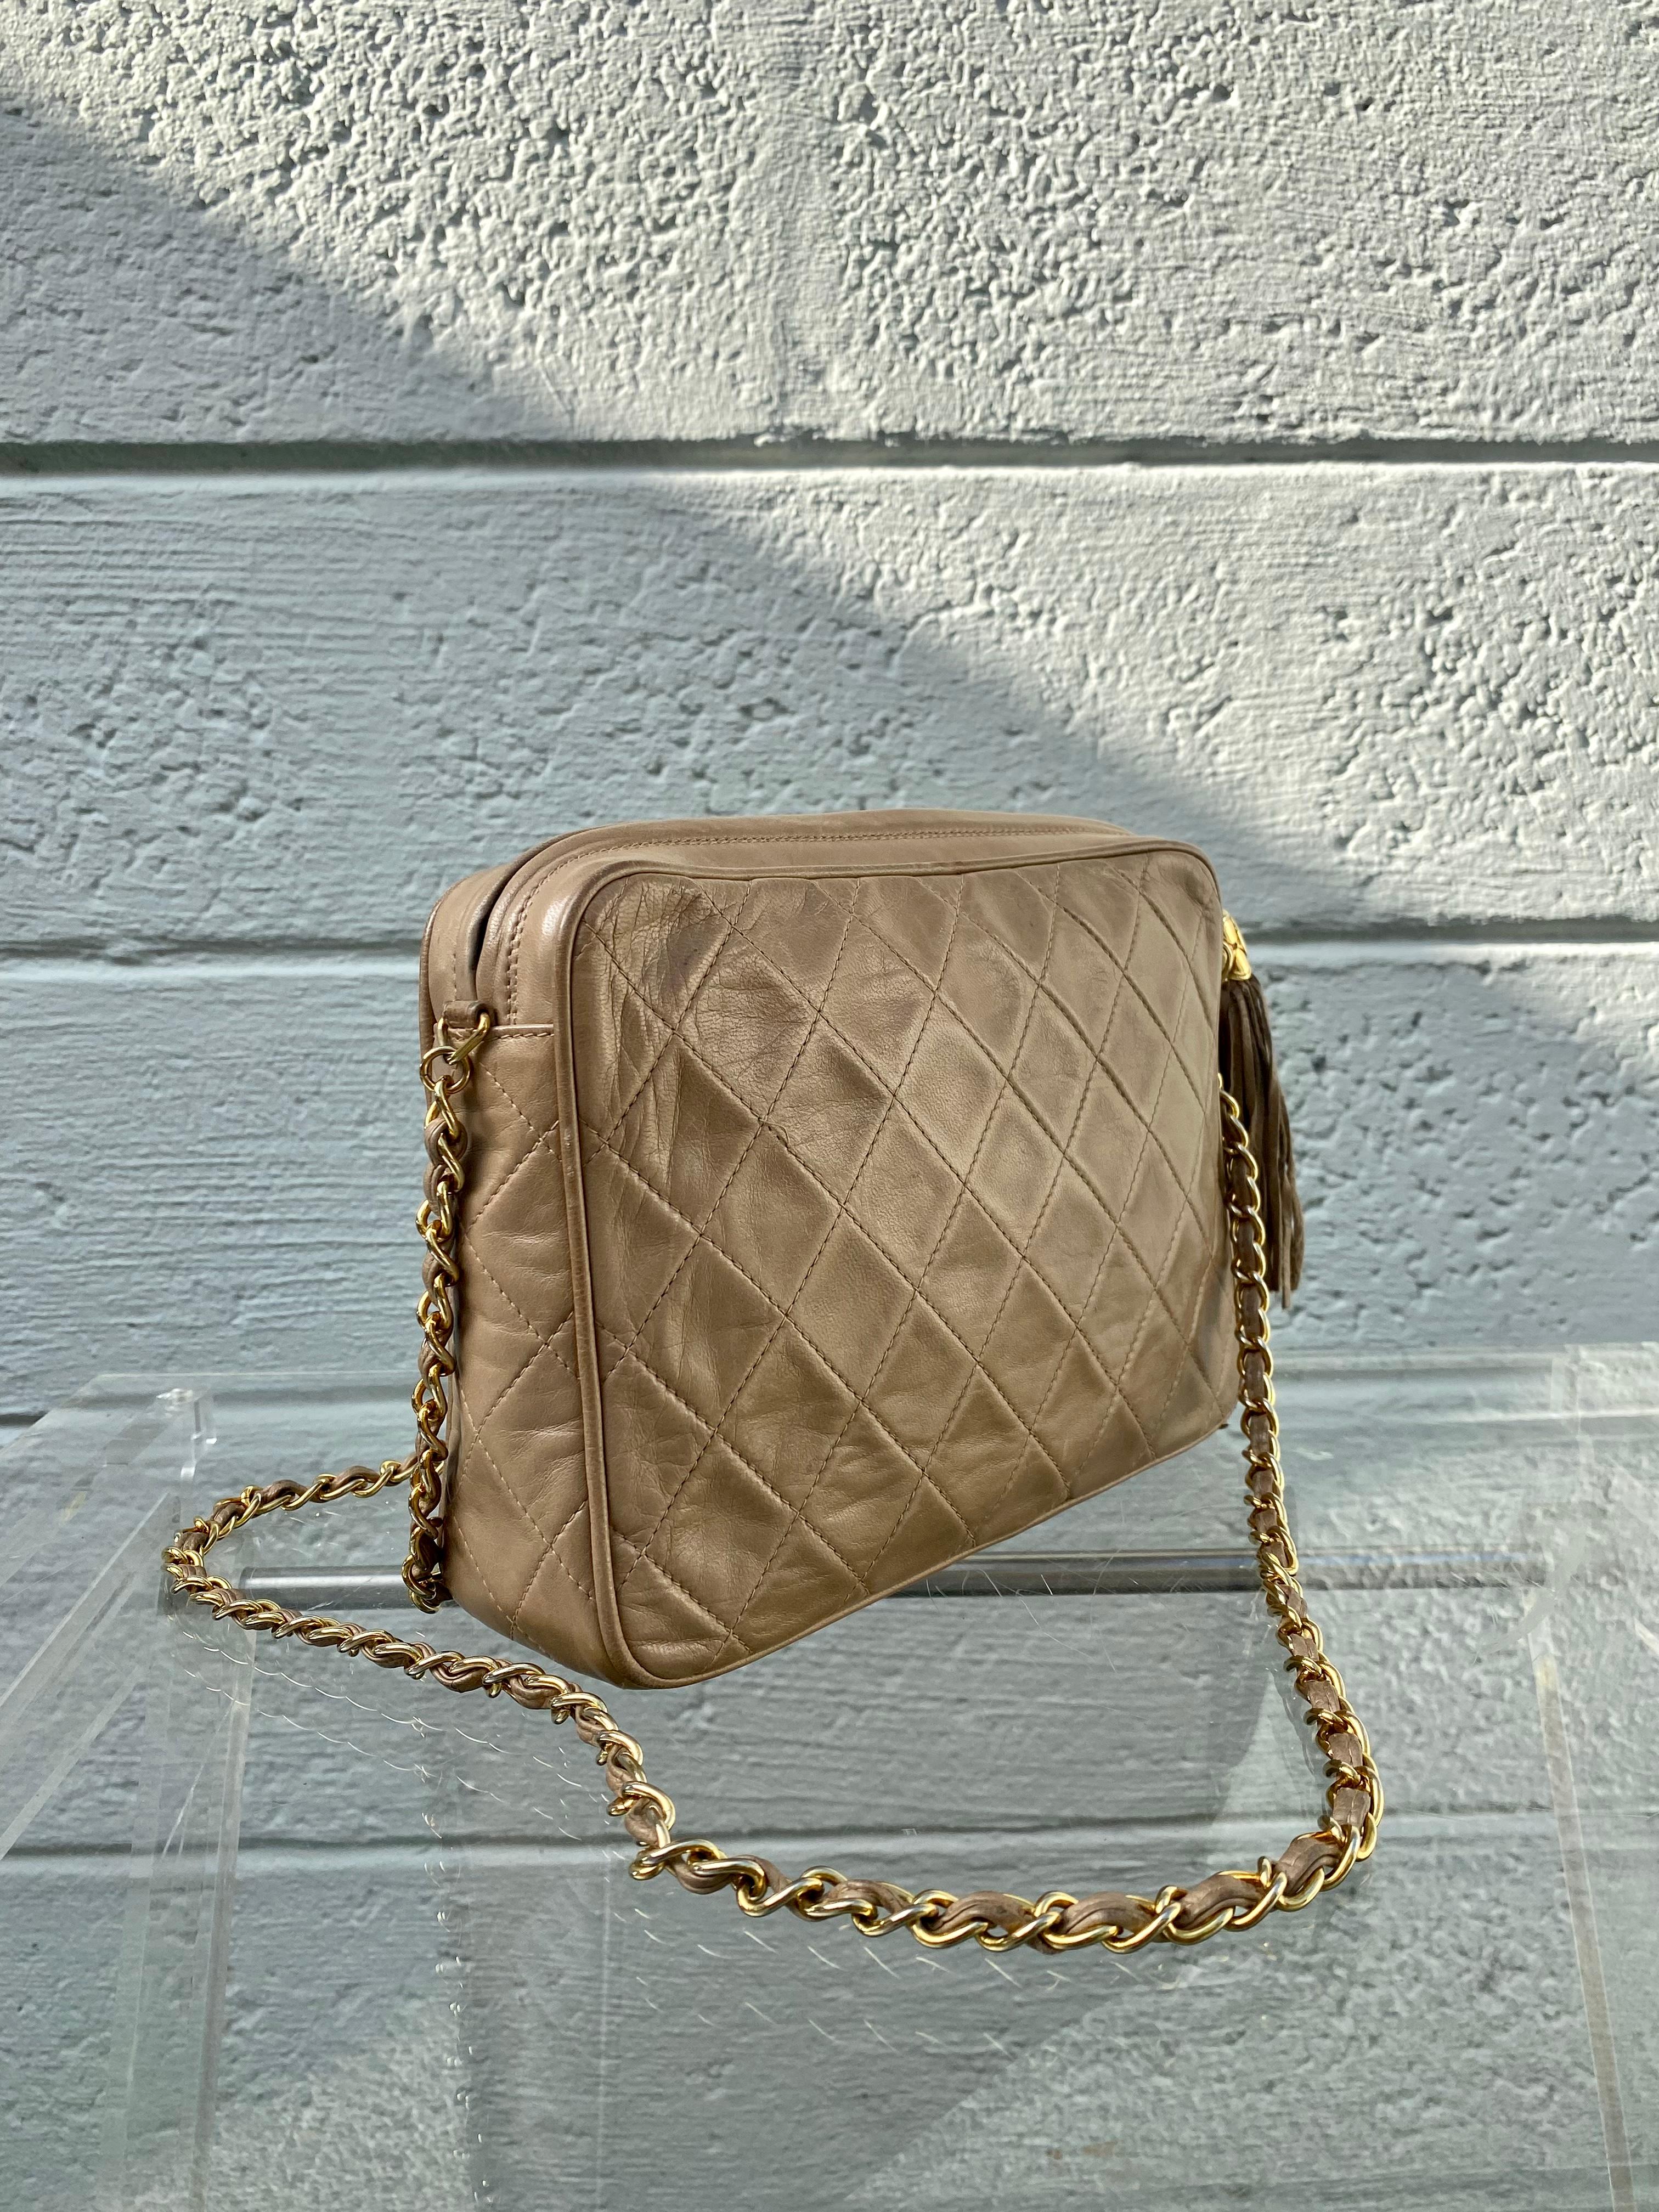 Chanel Vintage Beige Quilted Lambskin Camera Crossbody Bag For Sale 1